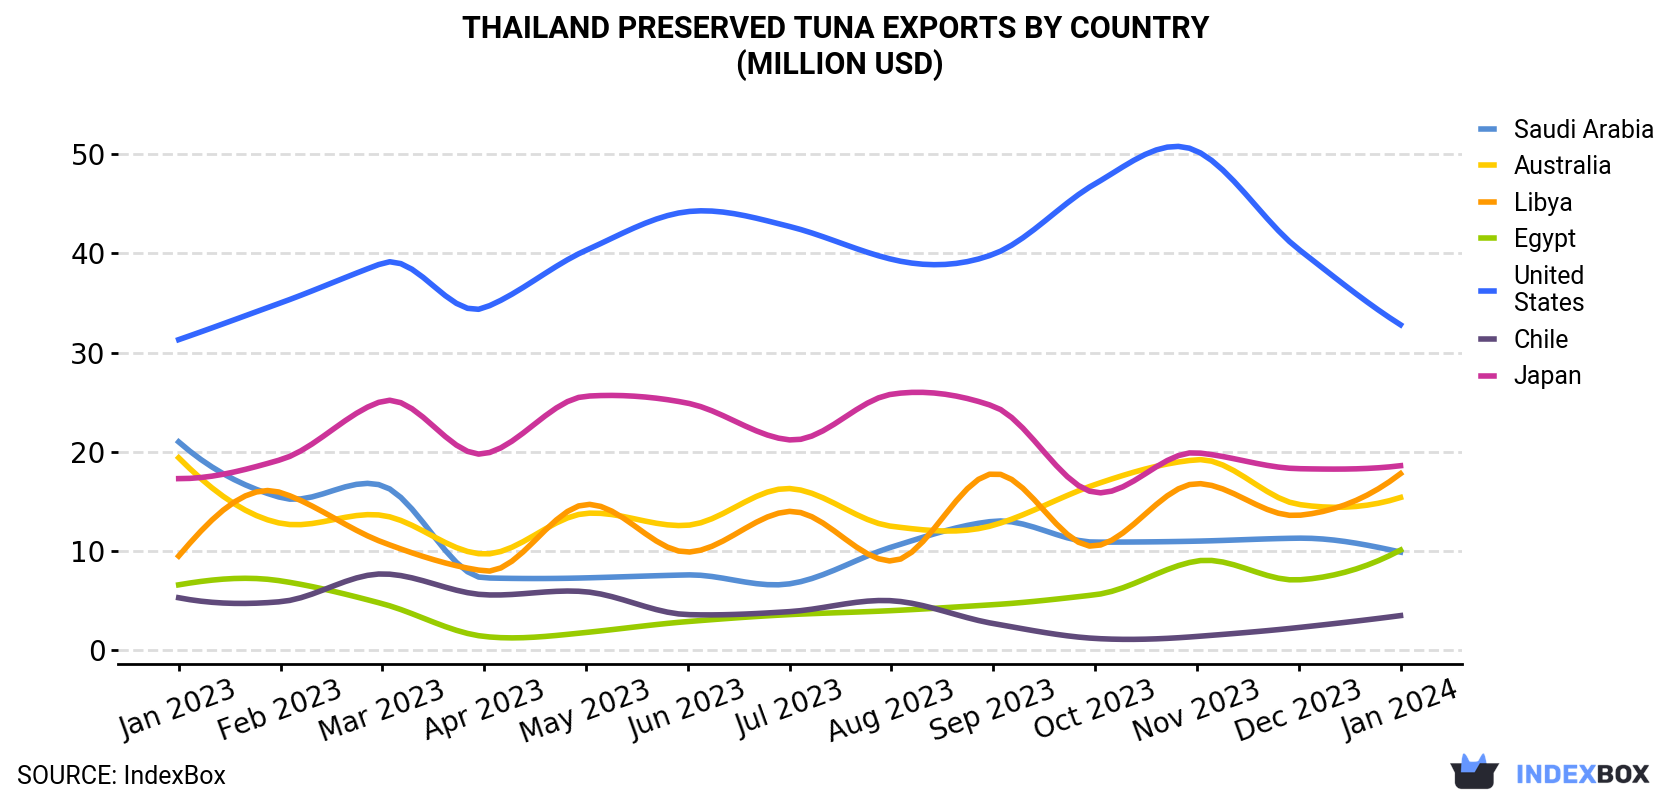 Thailand Preserved Tuna Exports By Country (Million USD)